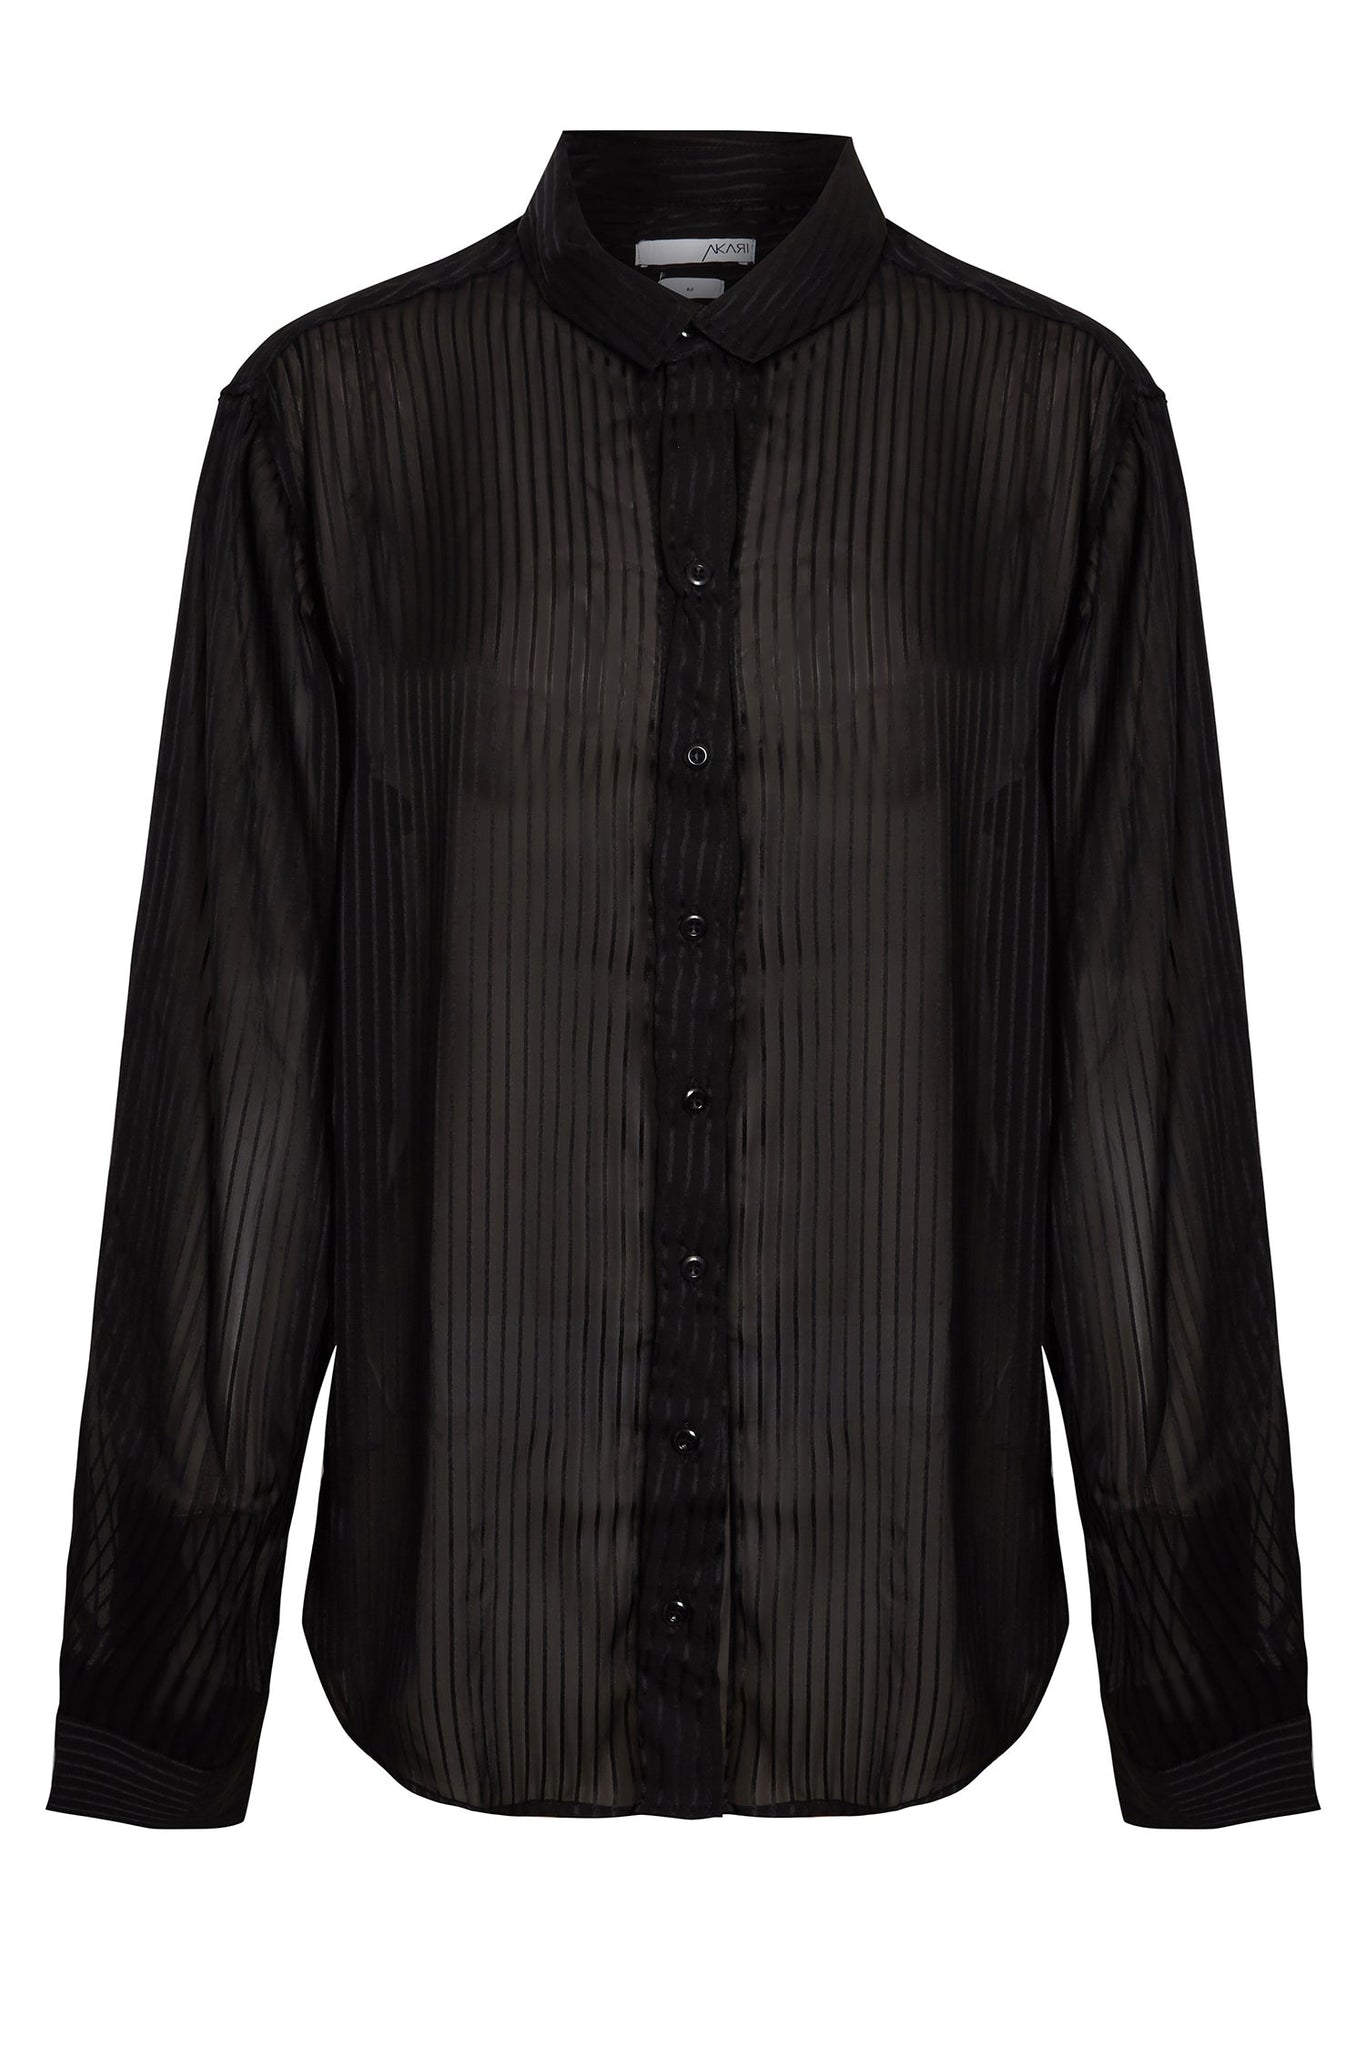 SATIN STRIPE ORGANZA RELAXED FIT SHIRT